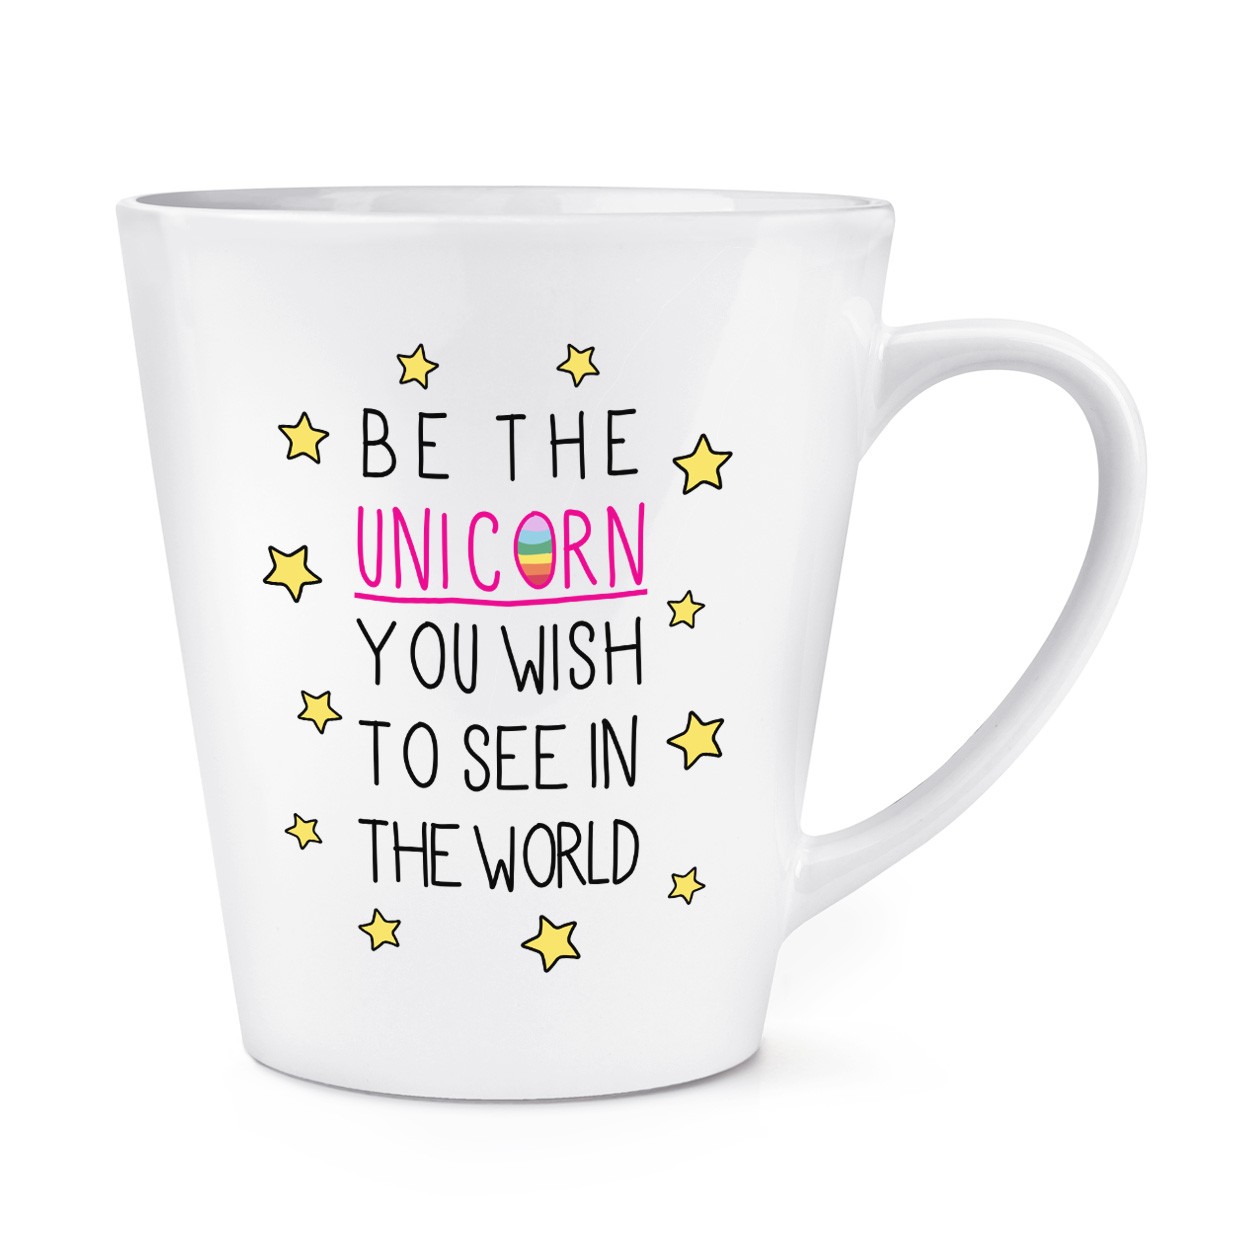 Be The Unicorn You Wish to See in the World 12oz Latte Mug Cup